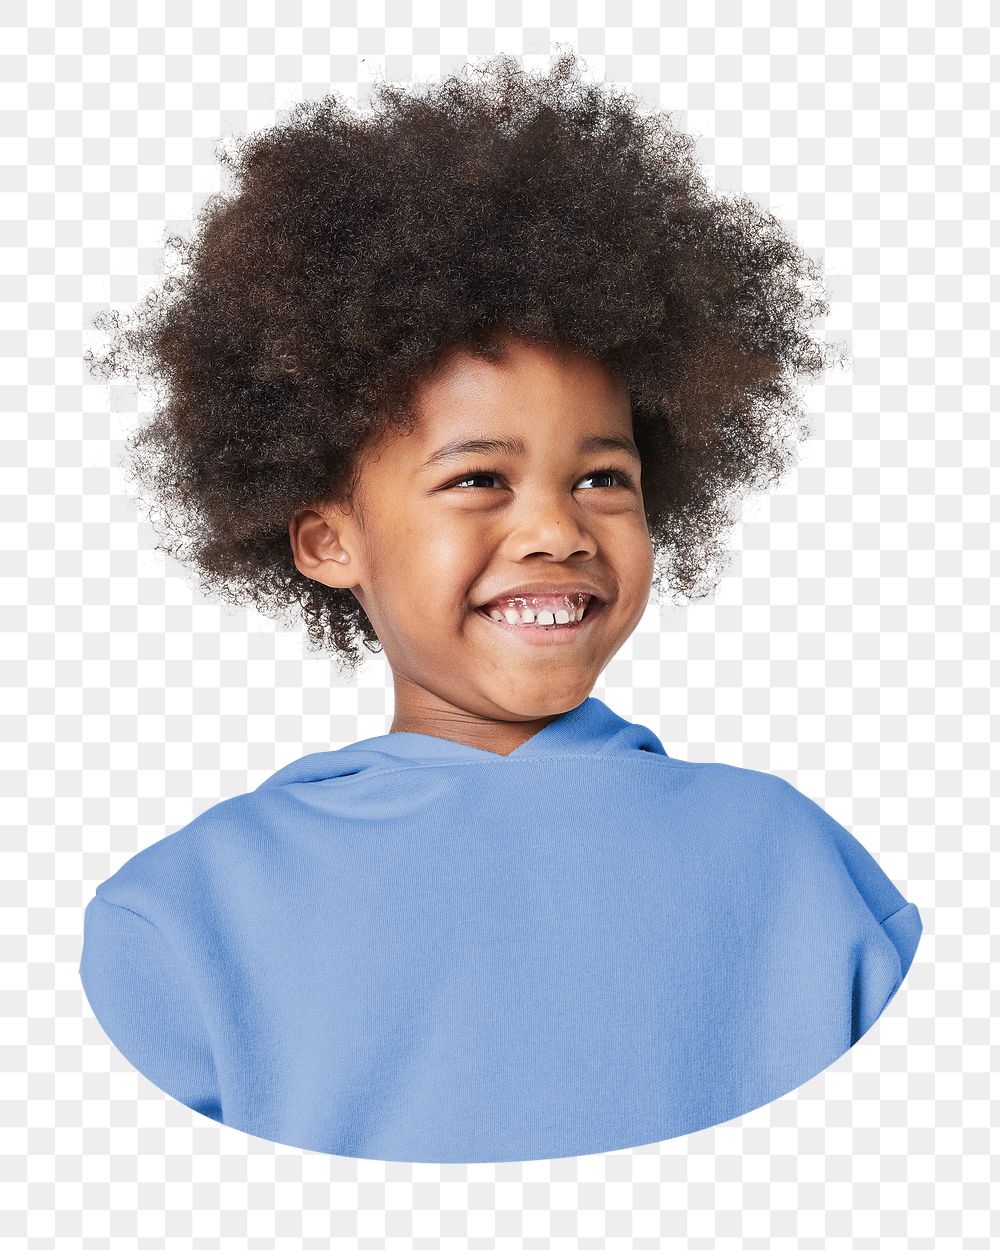 Happy png African Amercian child,  transparent background